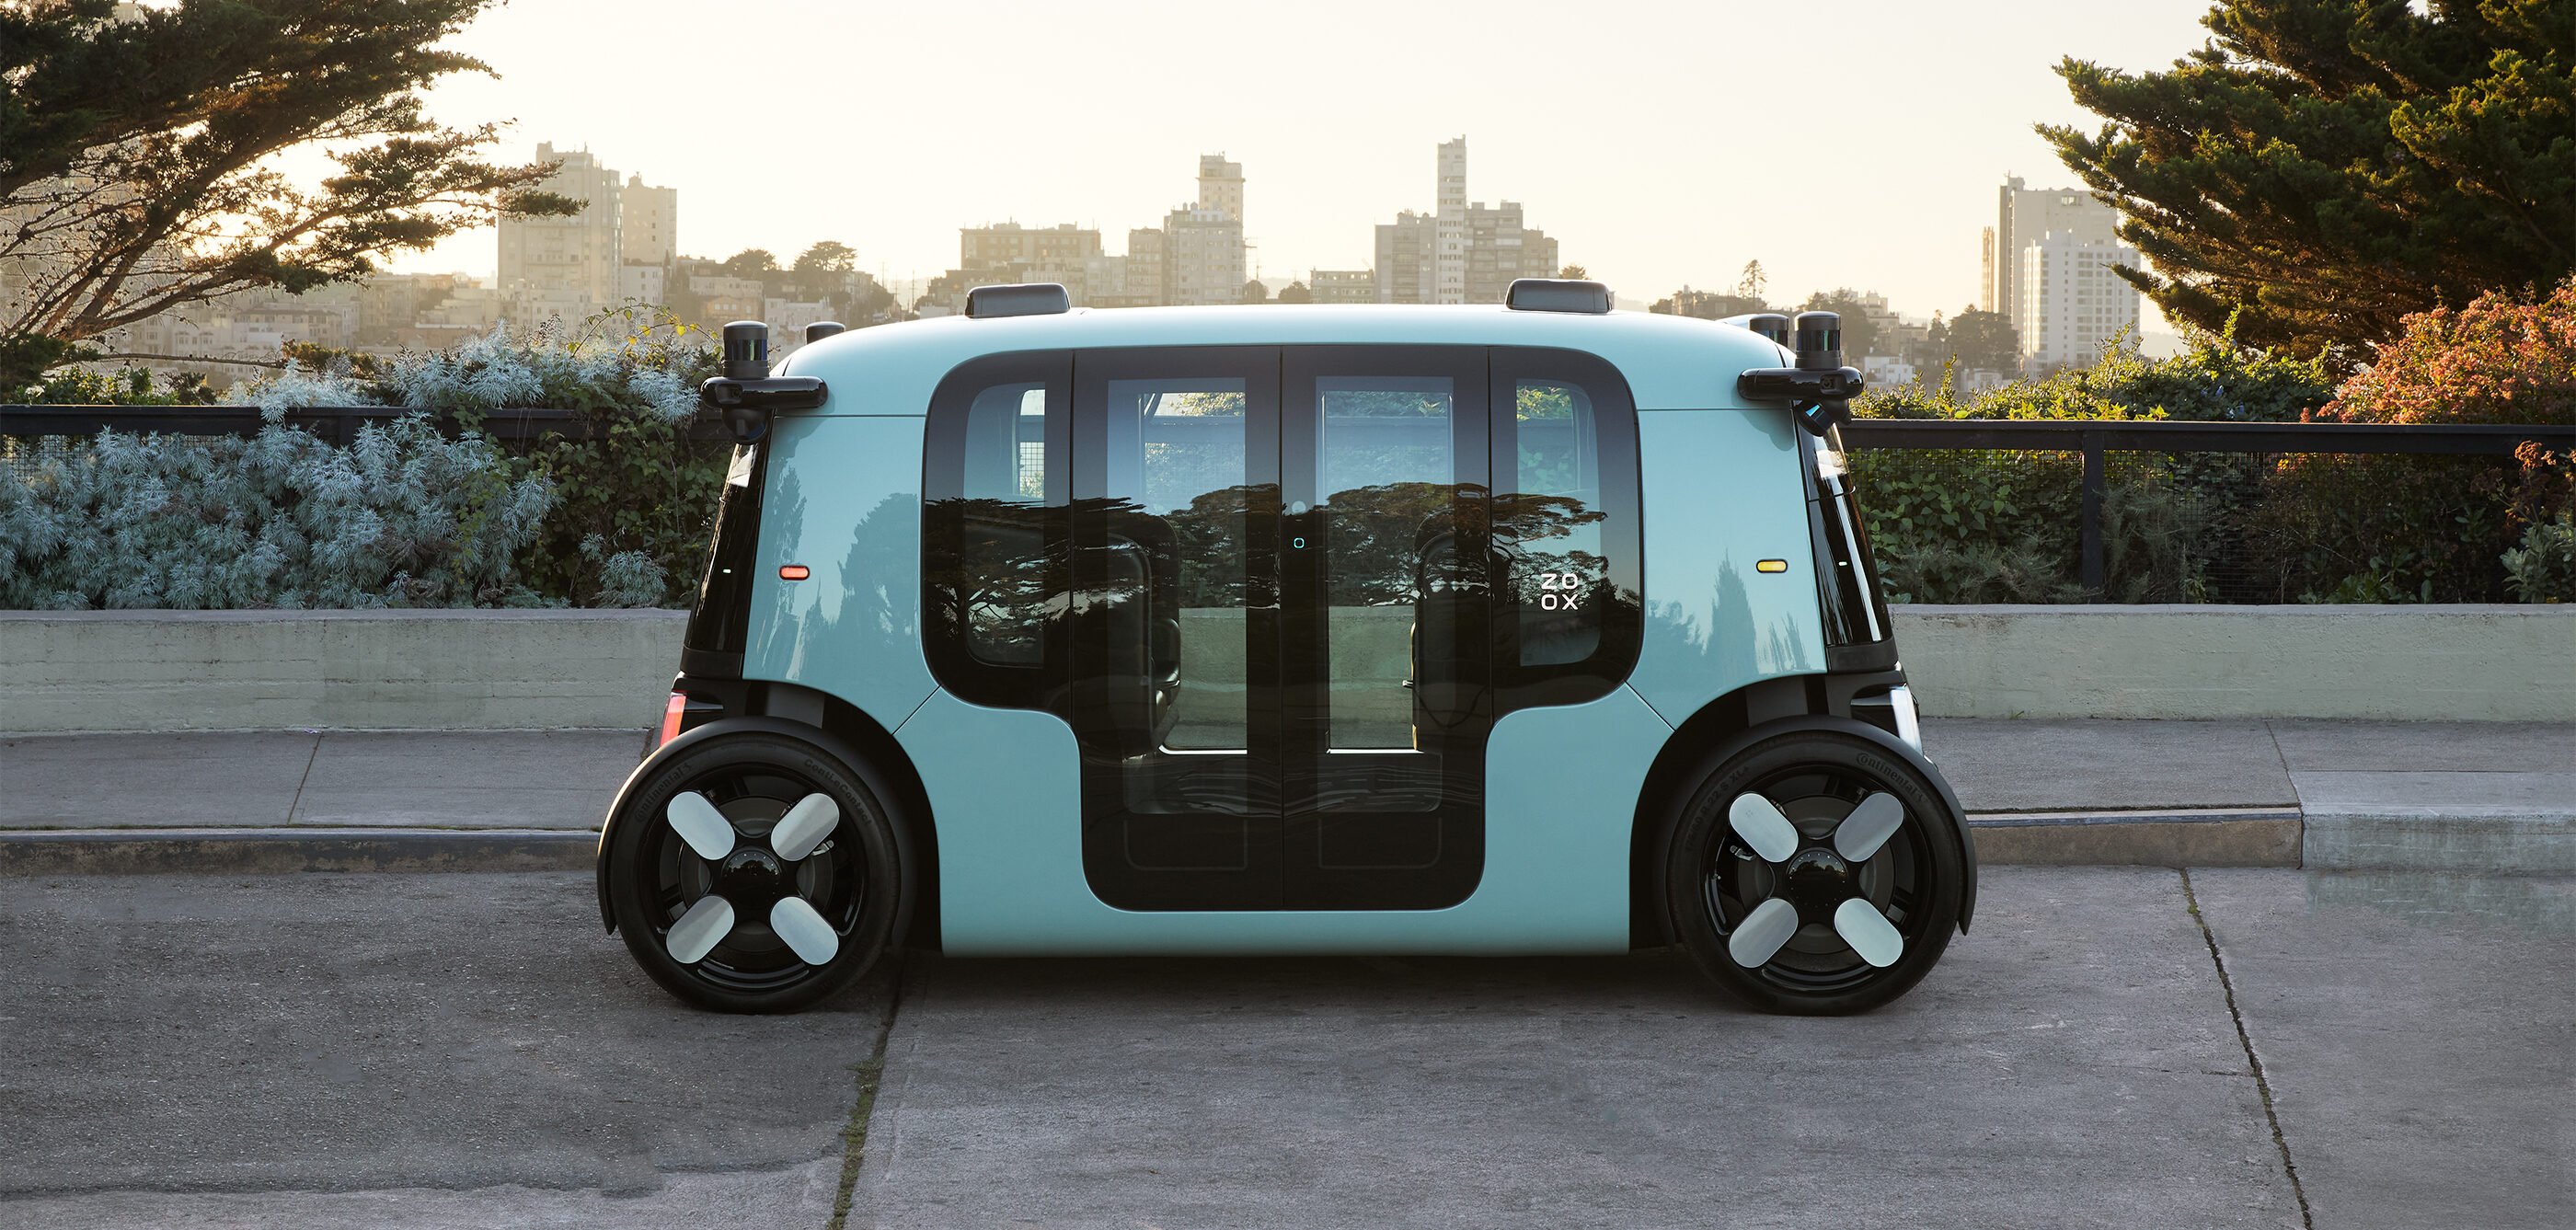 s Self-Driving Car Shuttles People on Public Roads for First Time